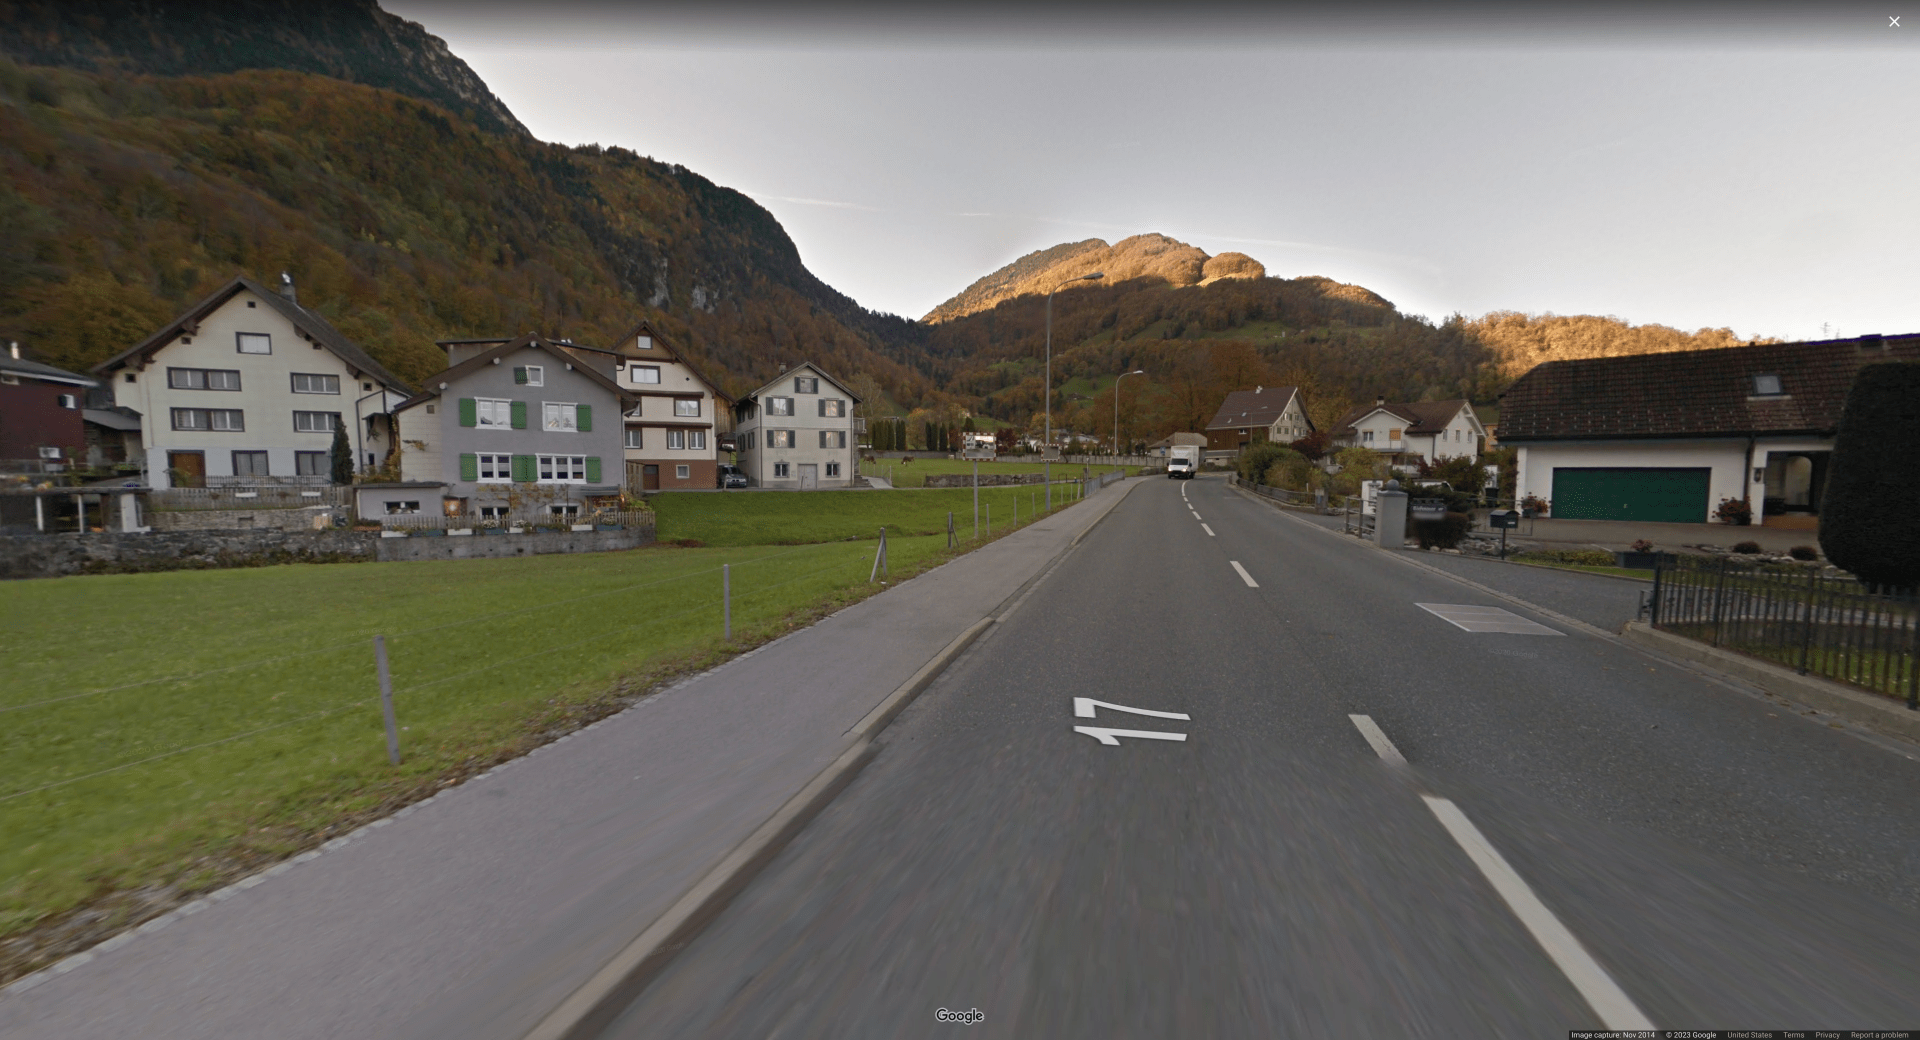 Picture of a small town next to a hillside, with North European/Scandinavian-style houses